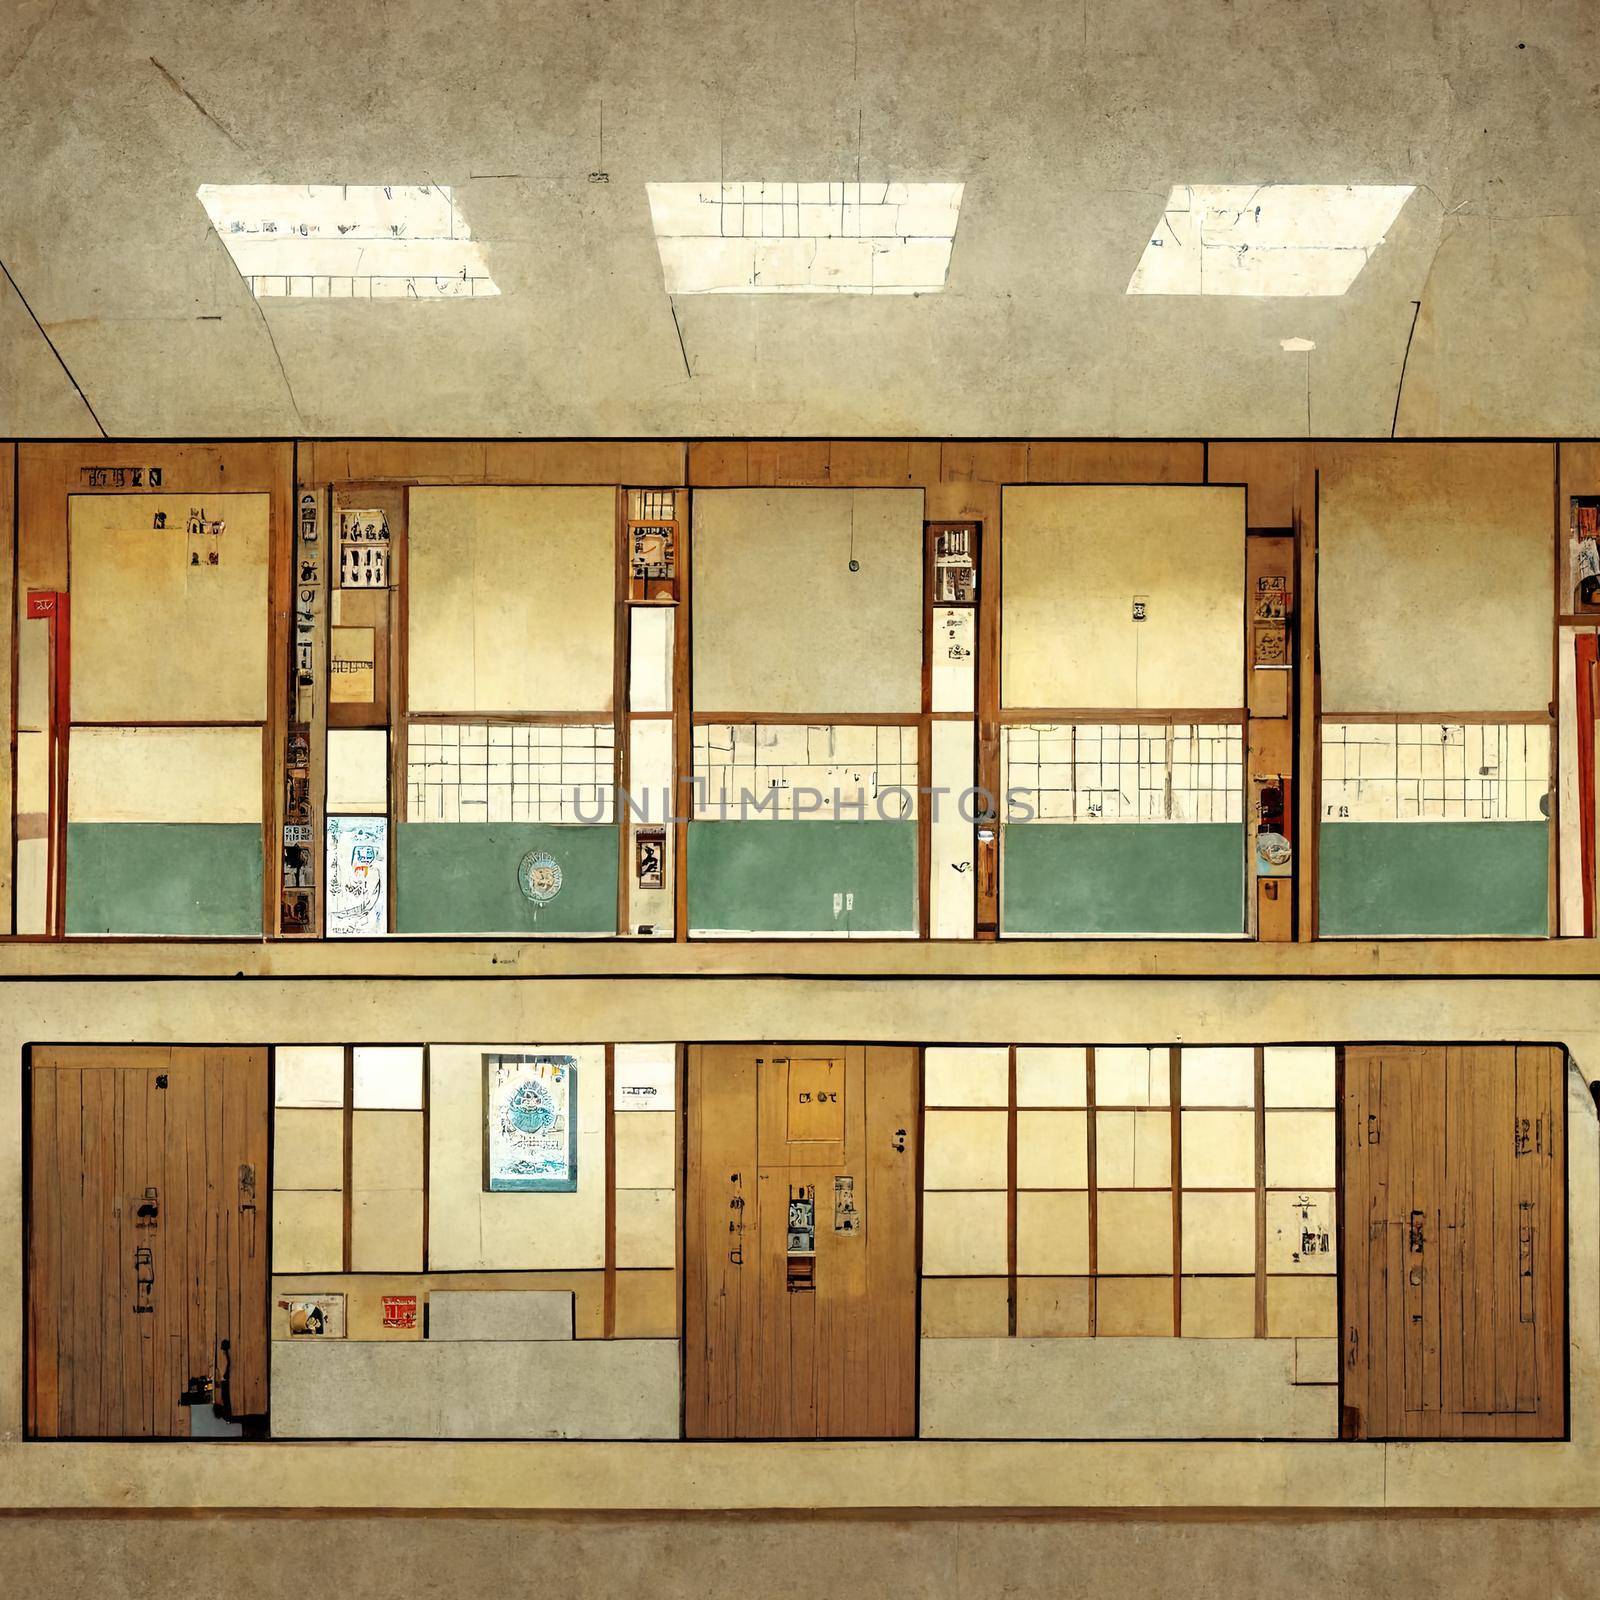 Japanese high school classrooms, 2D anime style look. High quality illustration